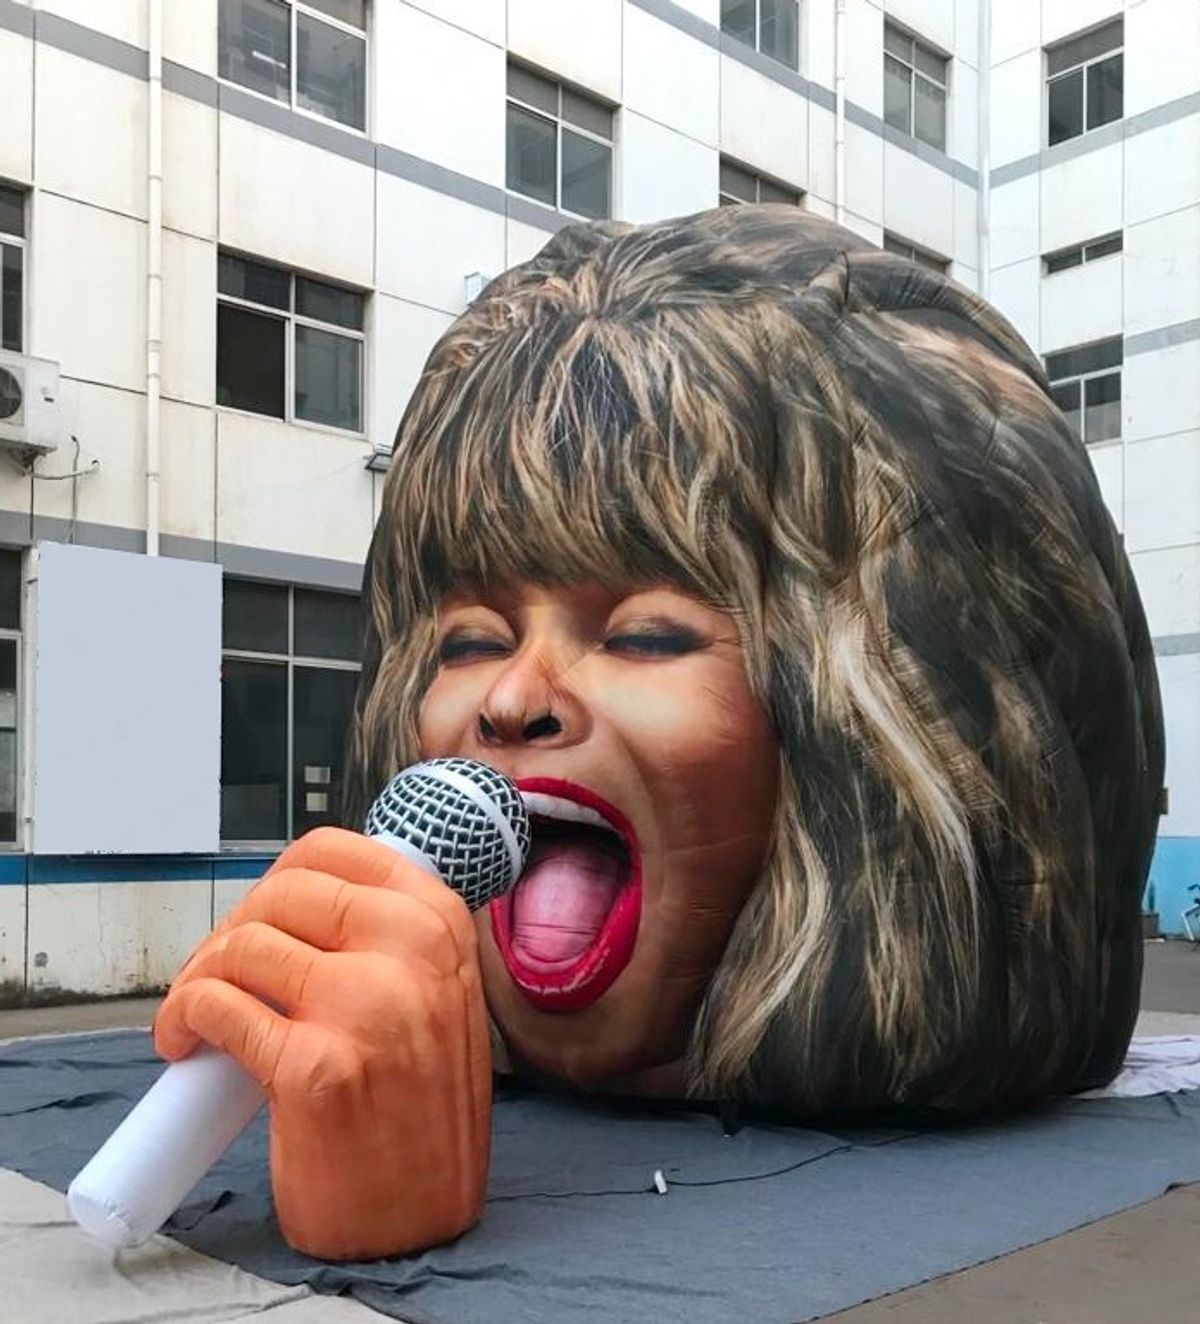 A rendering of the new Tina Turner inflatable sculpture @dreamlandmarg